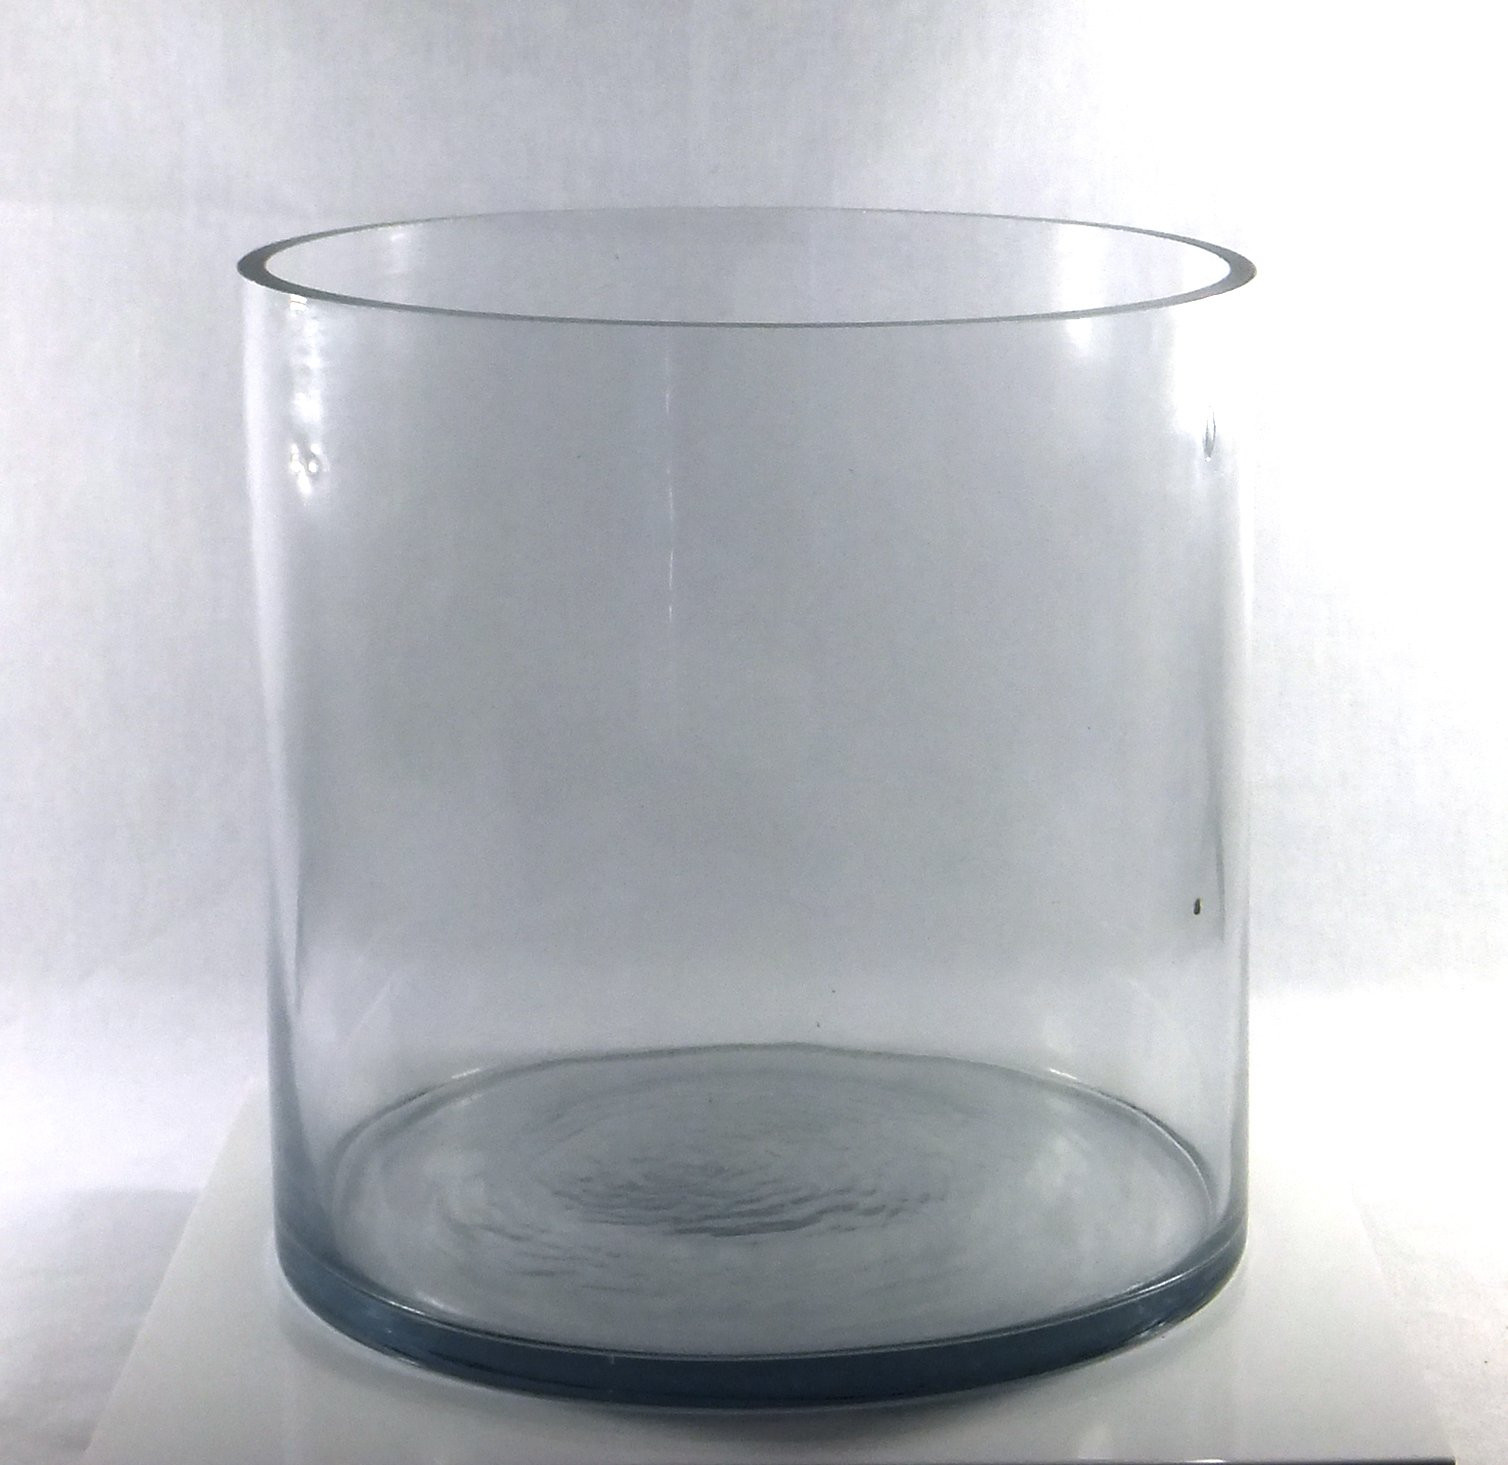 10 Lovable Amazon Clear Glass Vases 2024 free download amazon clear glass vases of buy 8 inch round large glass vase 8 clear cylinder oversize pertaining to 8 inch round large glass vase 8 clear cylinder oversize centerpiece 8x8